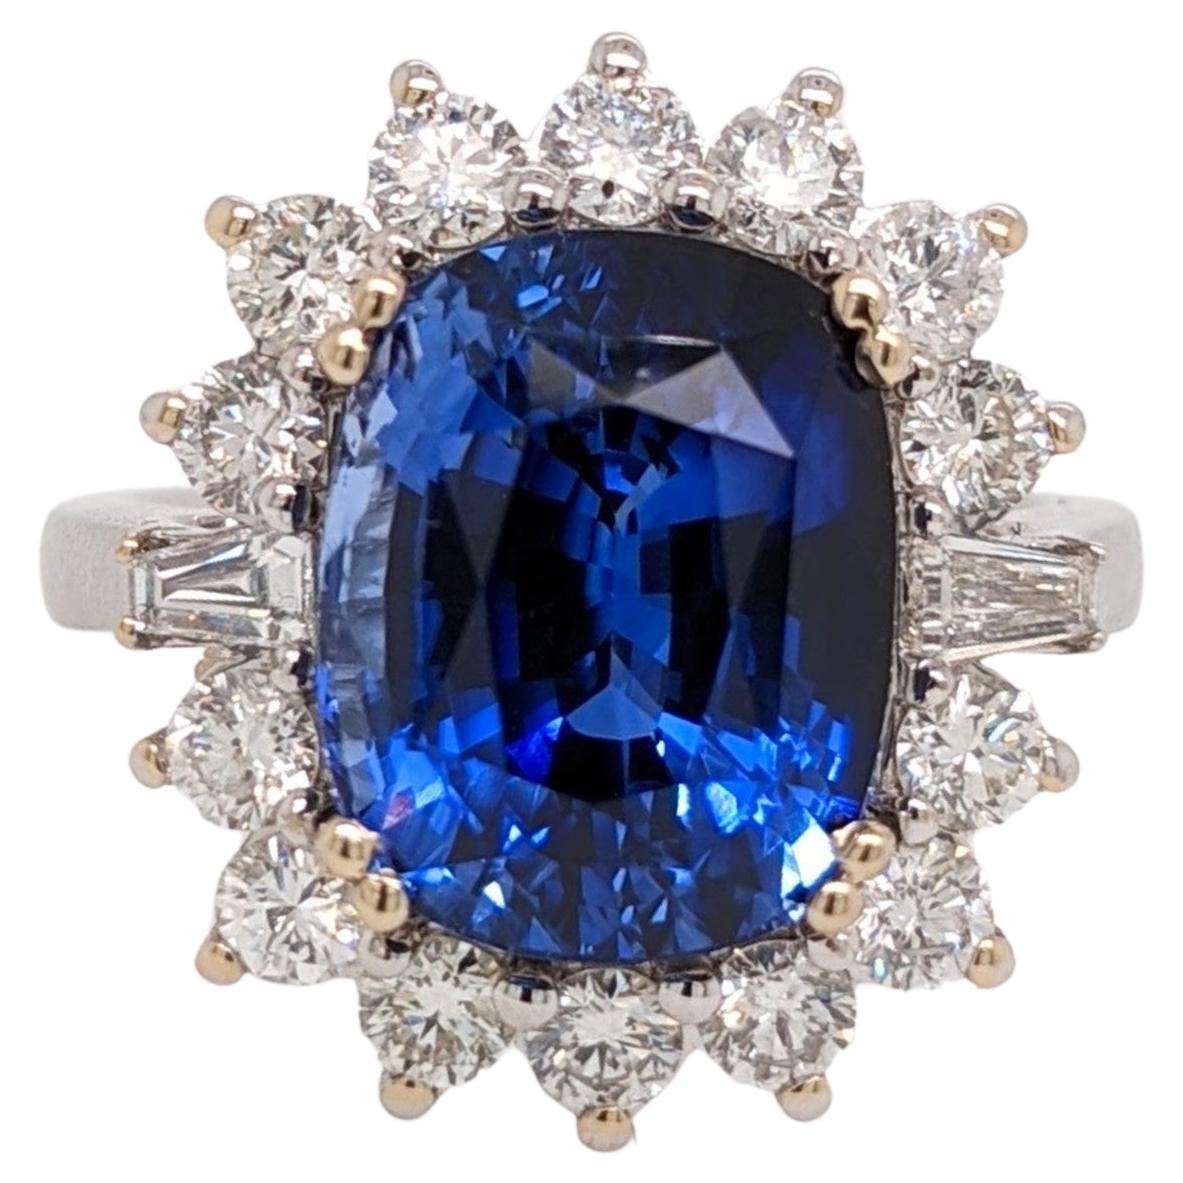 9 Carat Ceylon Sapphire Diamond Ring in Solid 18k White Gold  Cushion 12x10mm For Sale